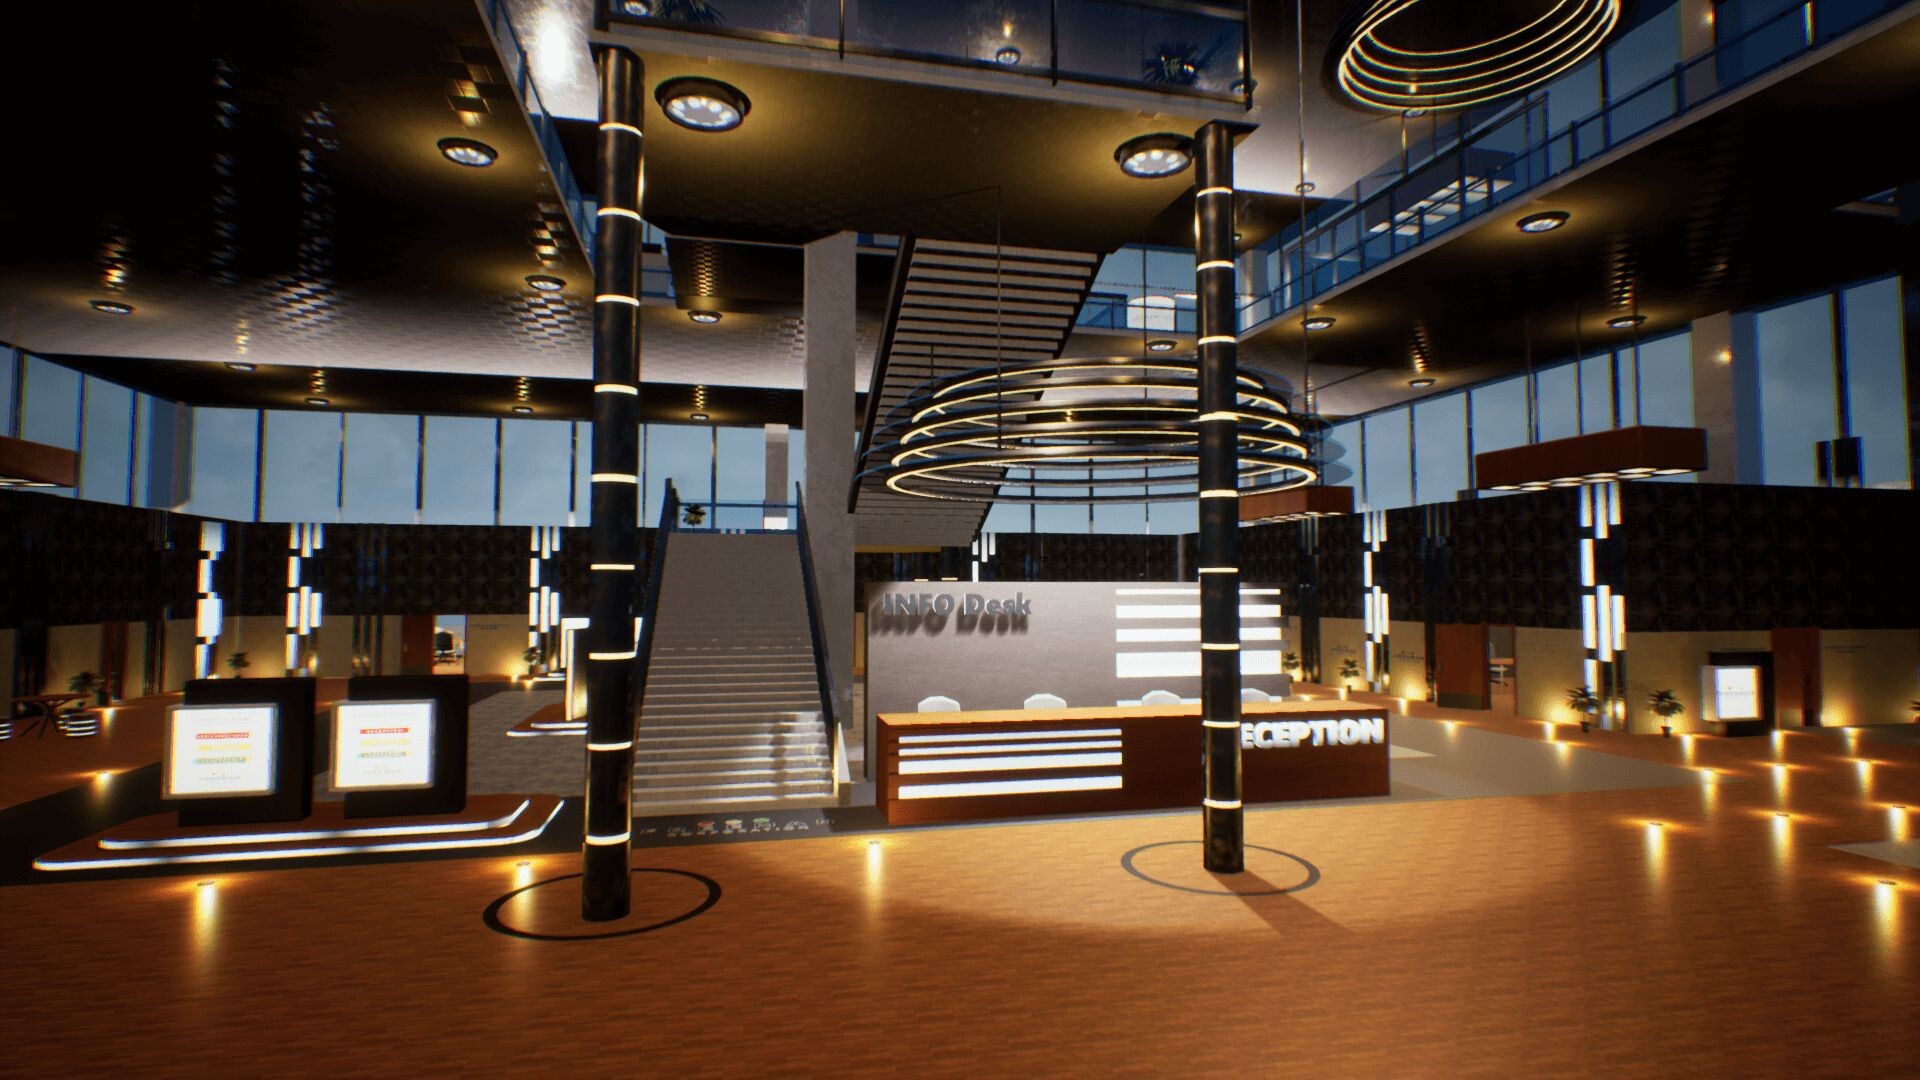 An image showing Corporate Building Freeman asset pack, created with Unreal Engine 4.